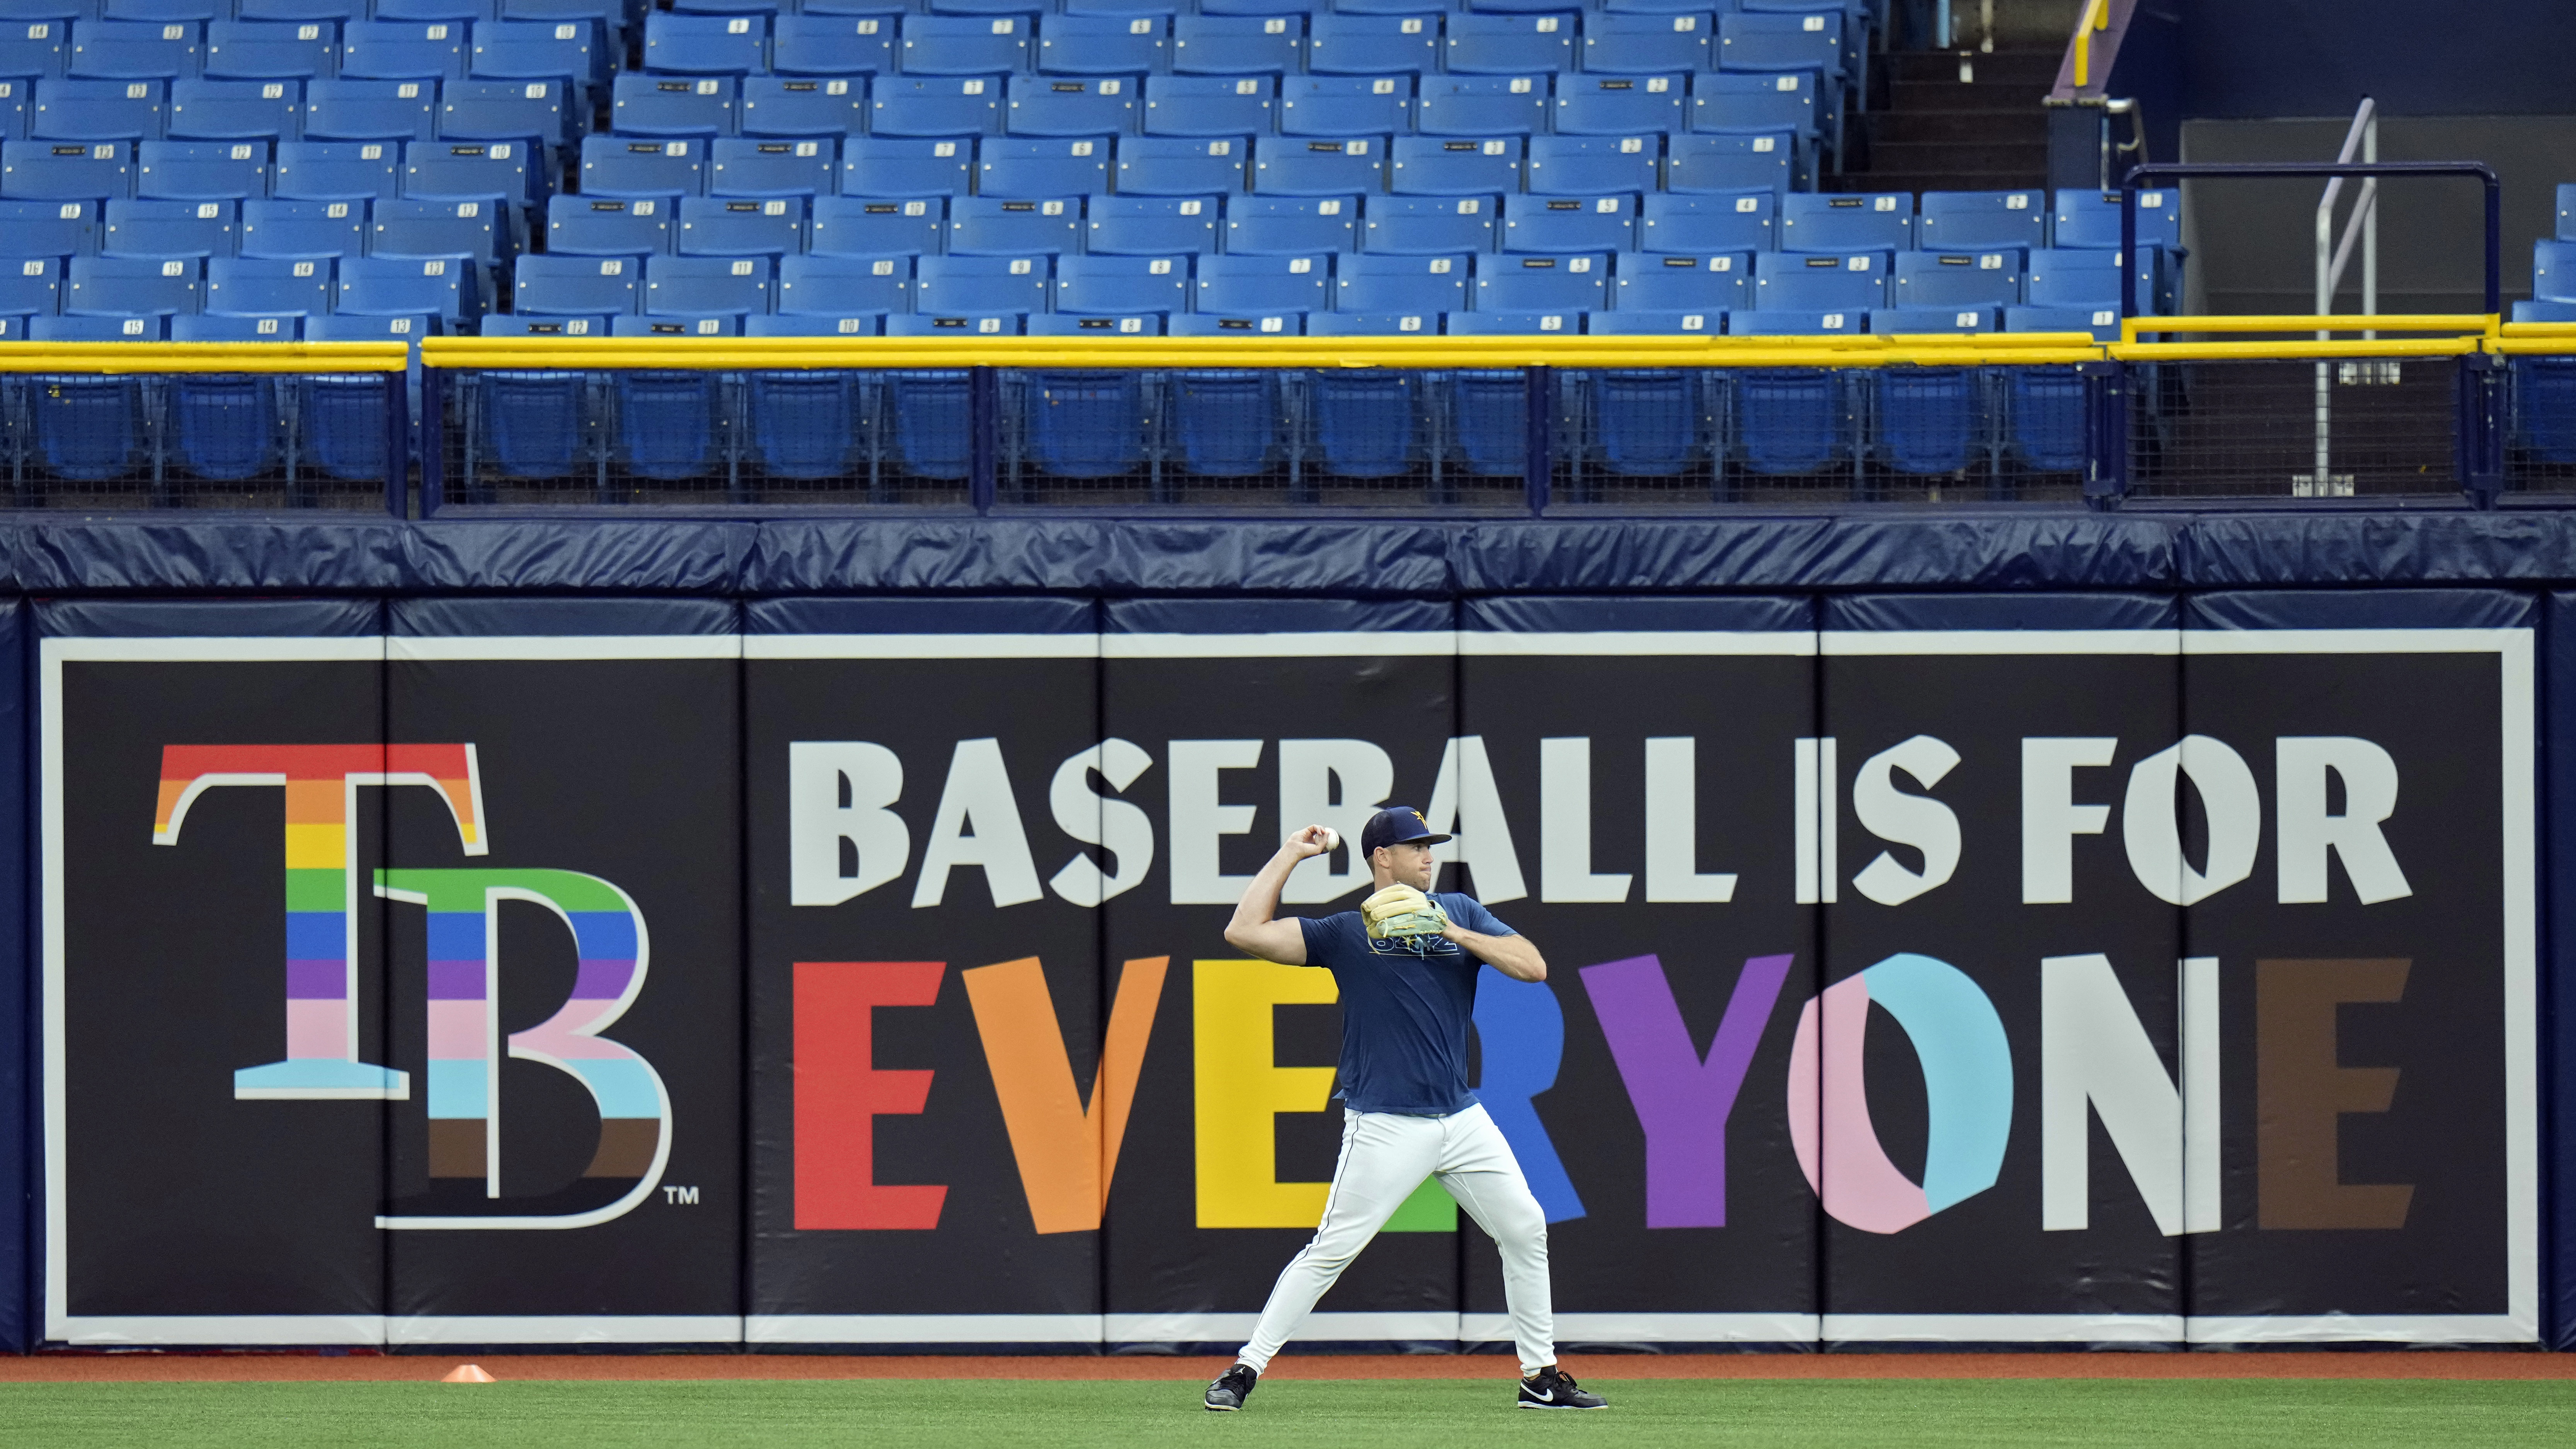 Tampa Bay Rays refusal to wear Pride logo signals a deeper issue